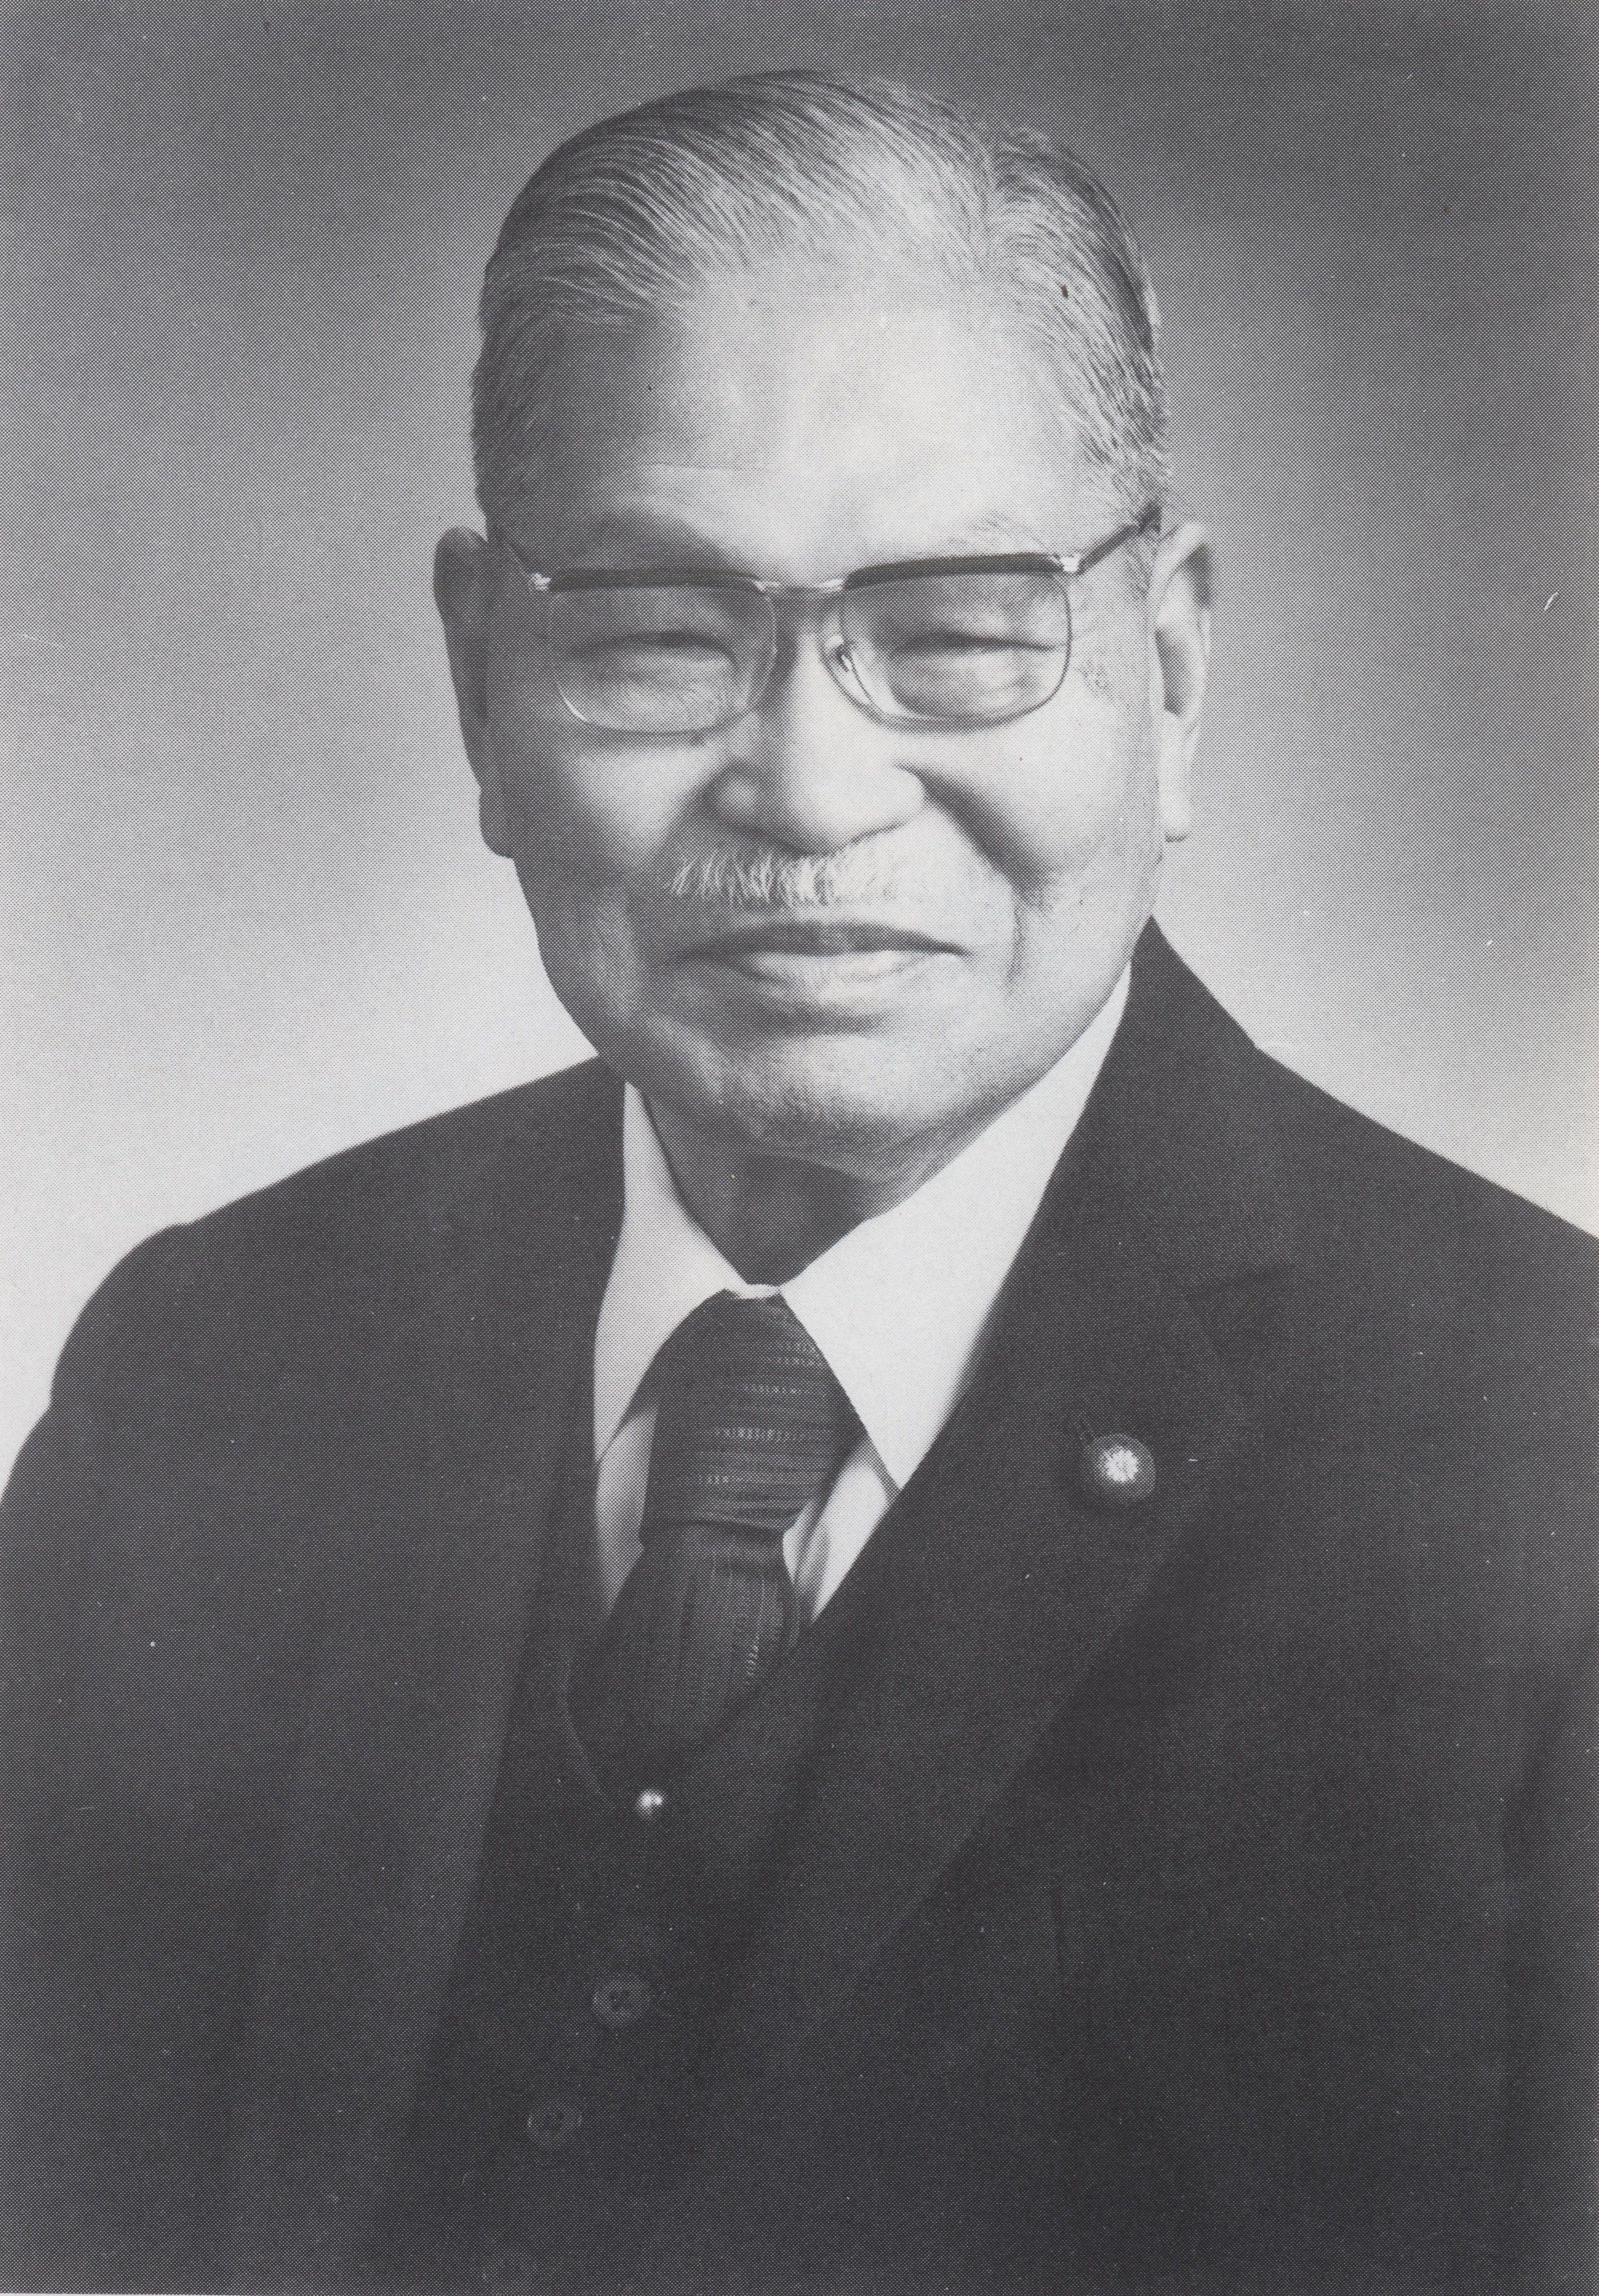 A black and white portrait of Kasai.